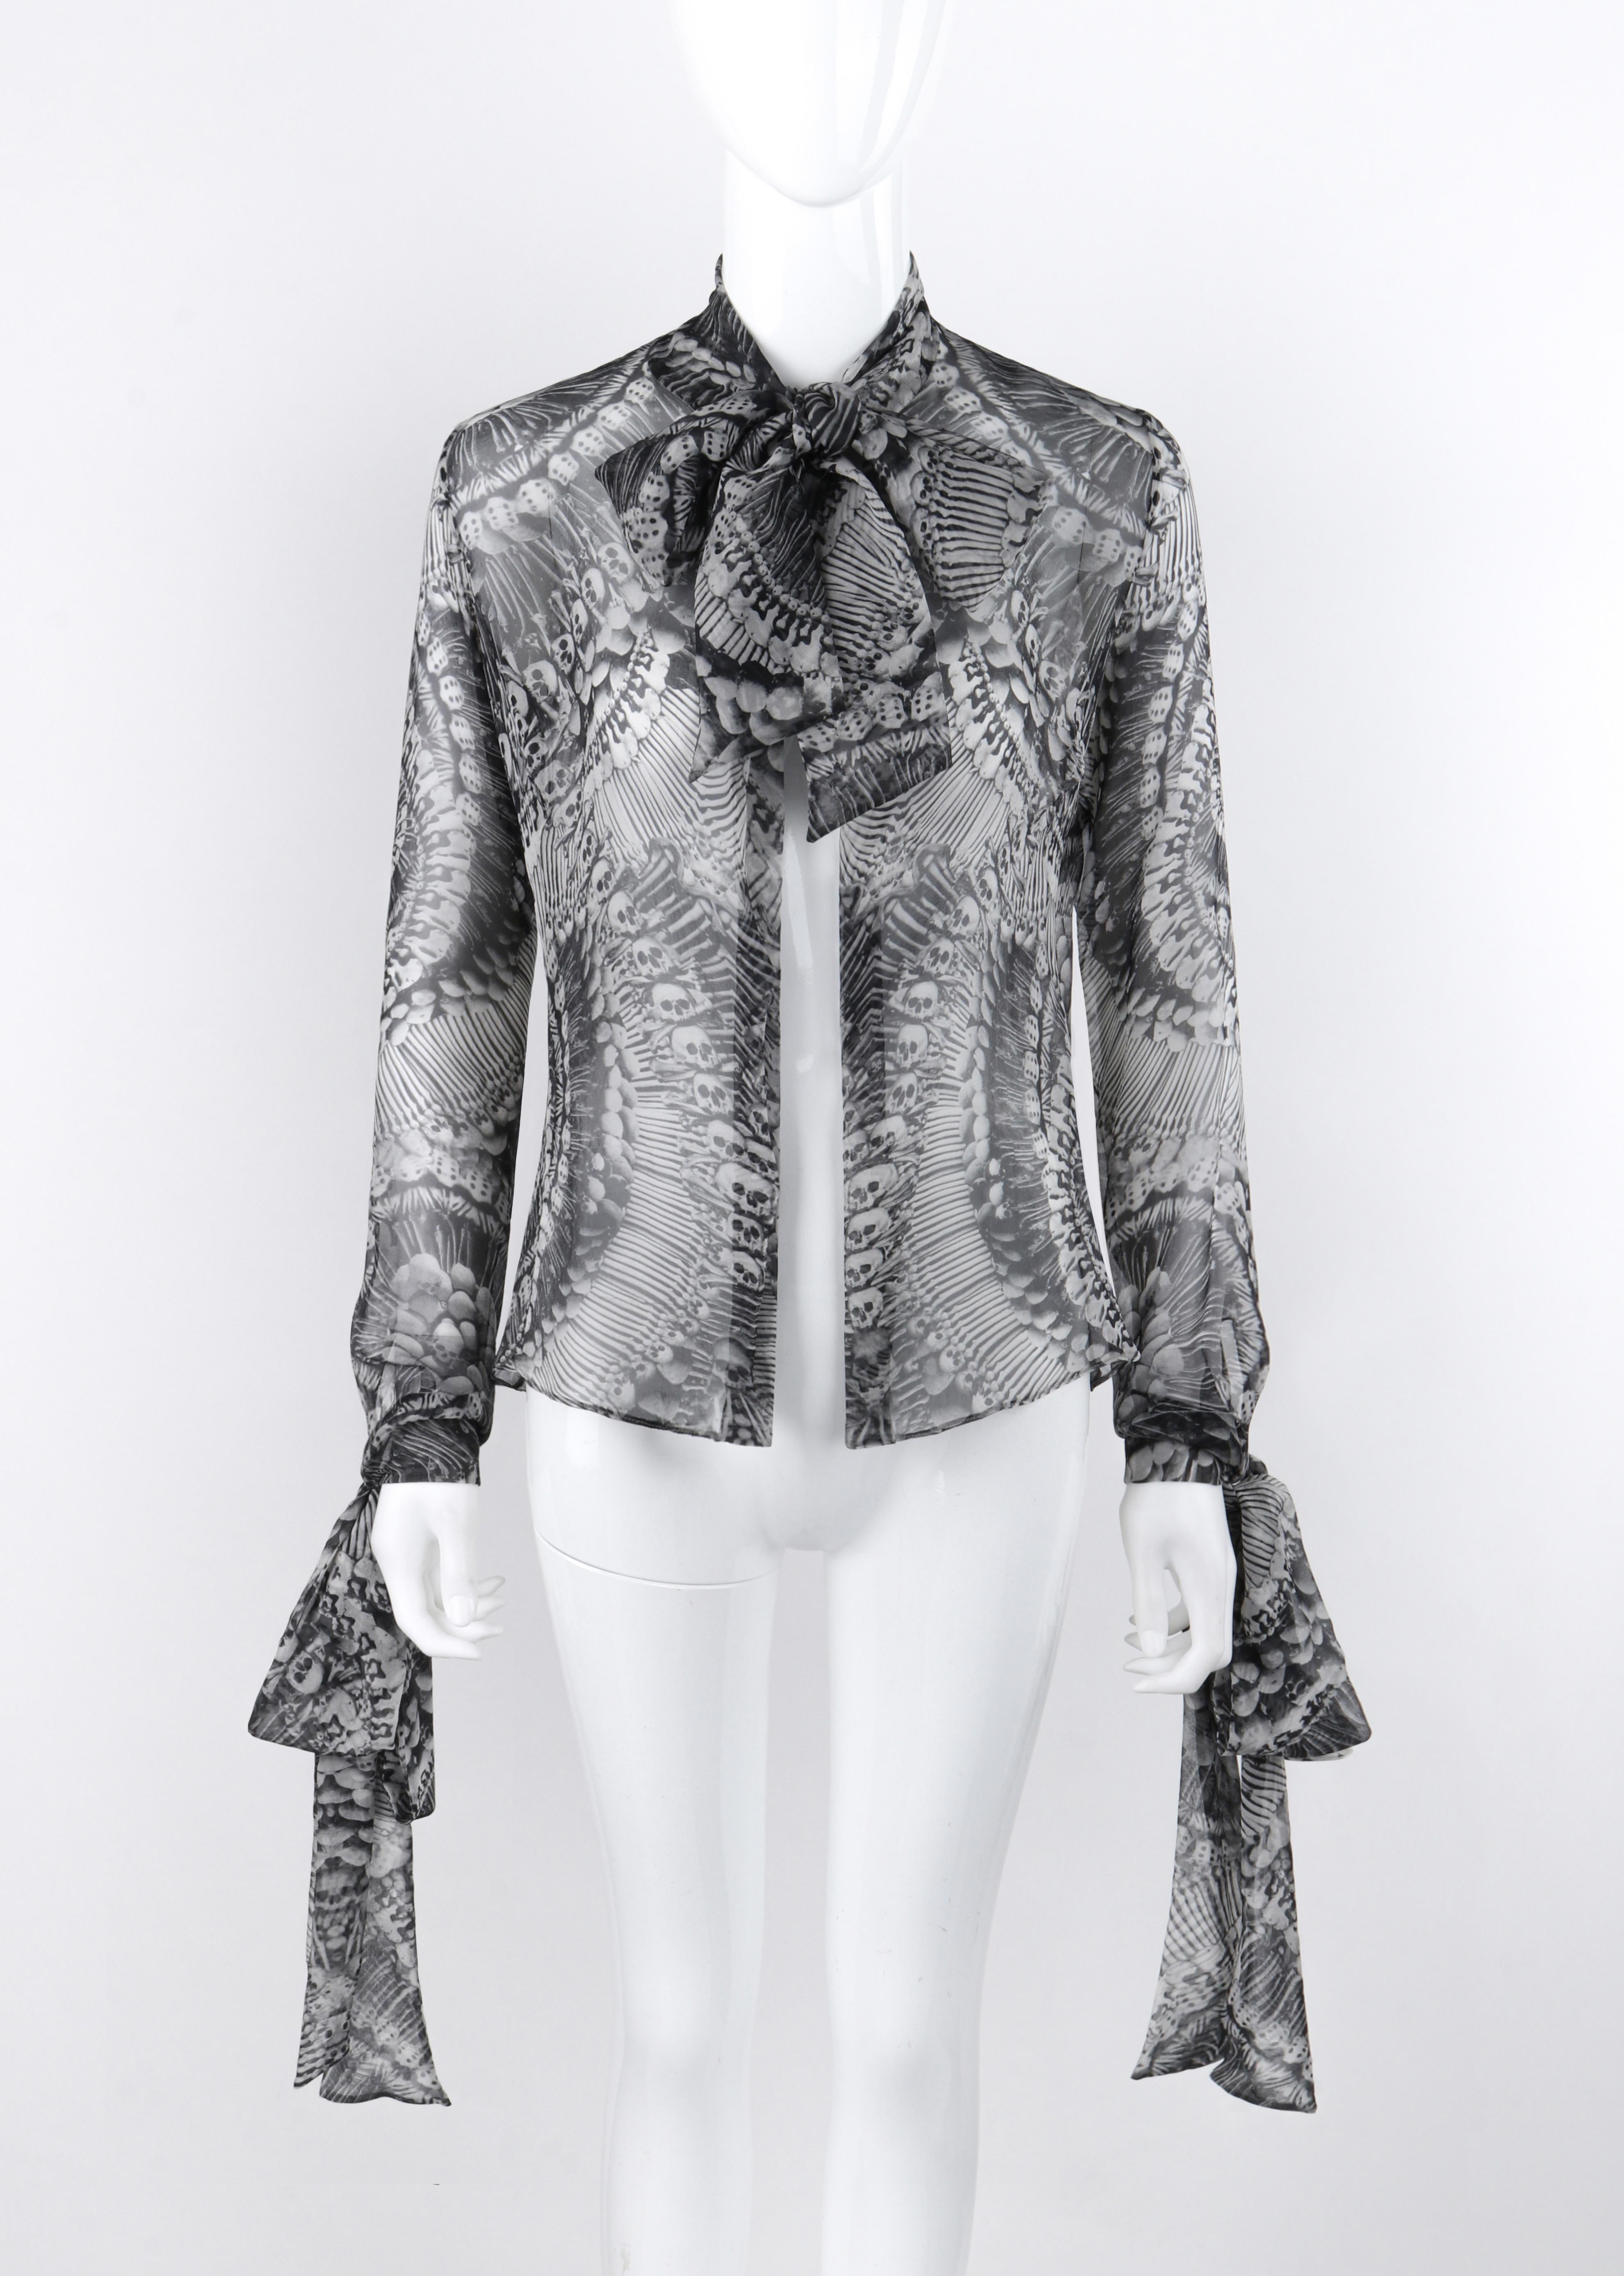 Brand / Manufacturer: Alexander McQueen
Collection: F/W 2010 
Designer: Alexander McQueen
Style: Blouse Top
Color(s): Shades of gray, white, black
Lined: No
Unmarked Fabric Content (feel of): Silk chiffon (primary fabric)
Additional Details /